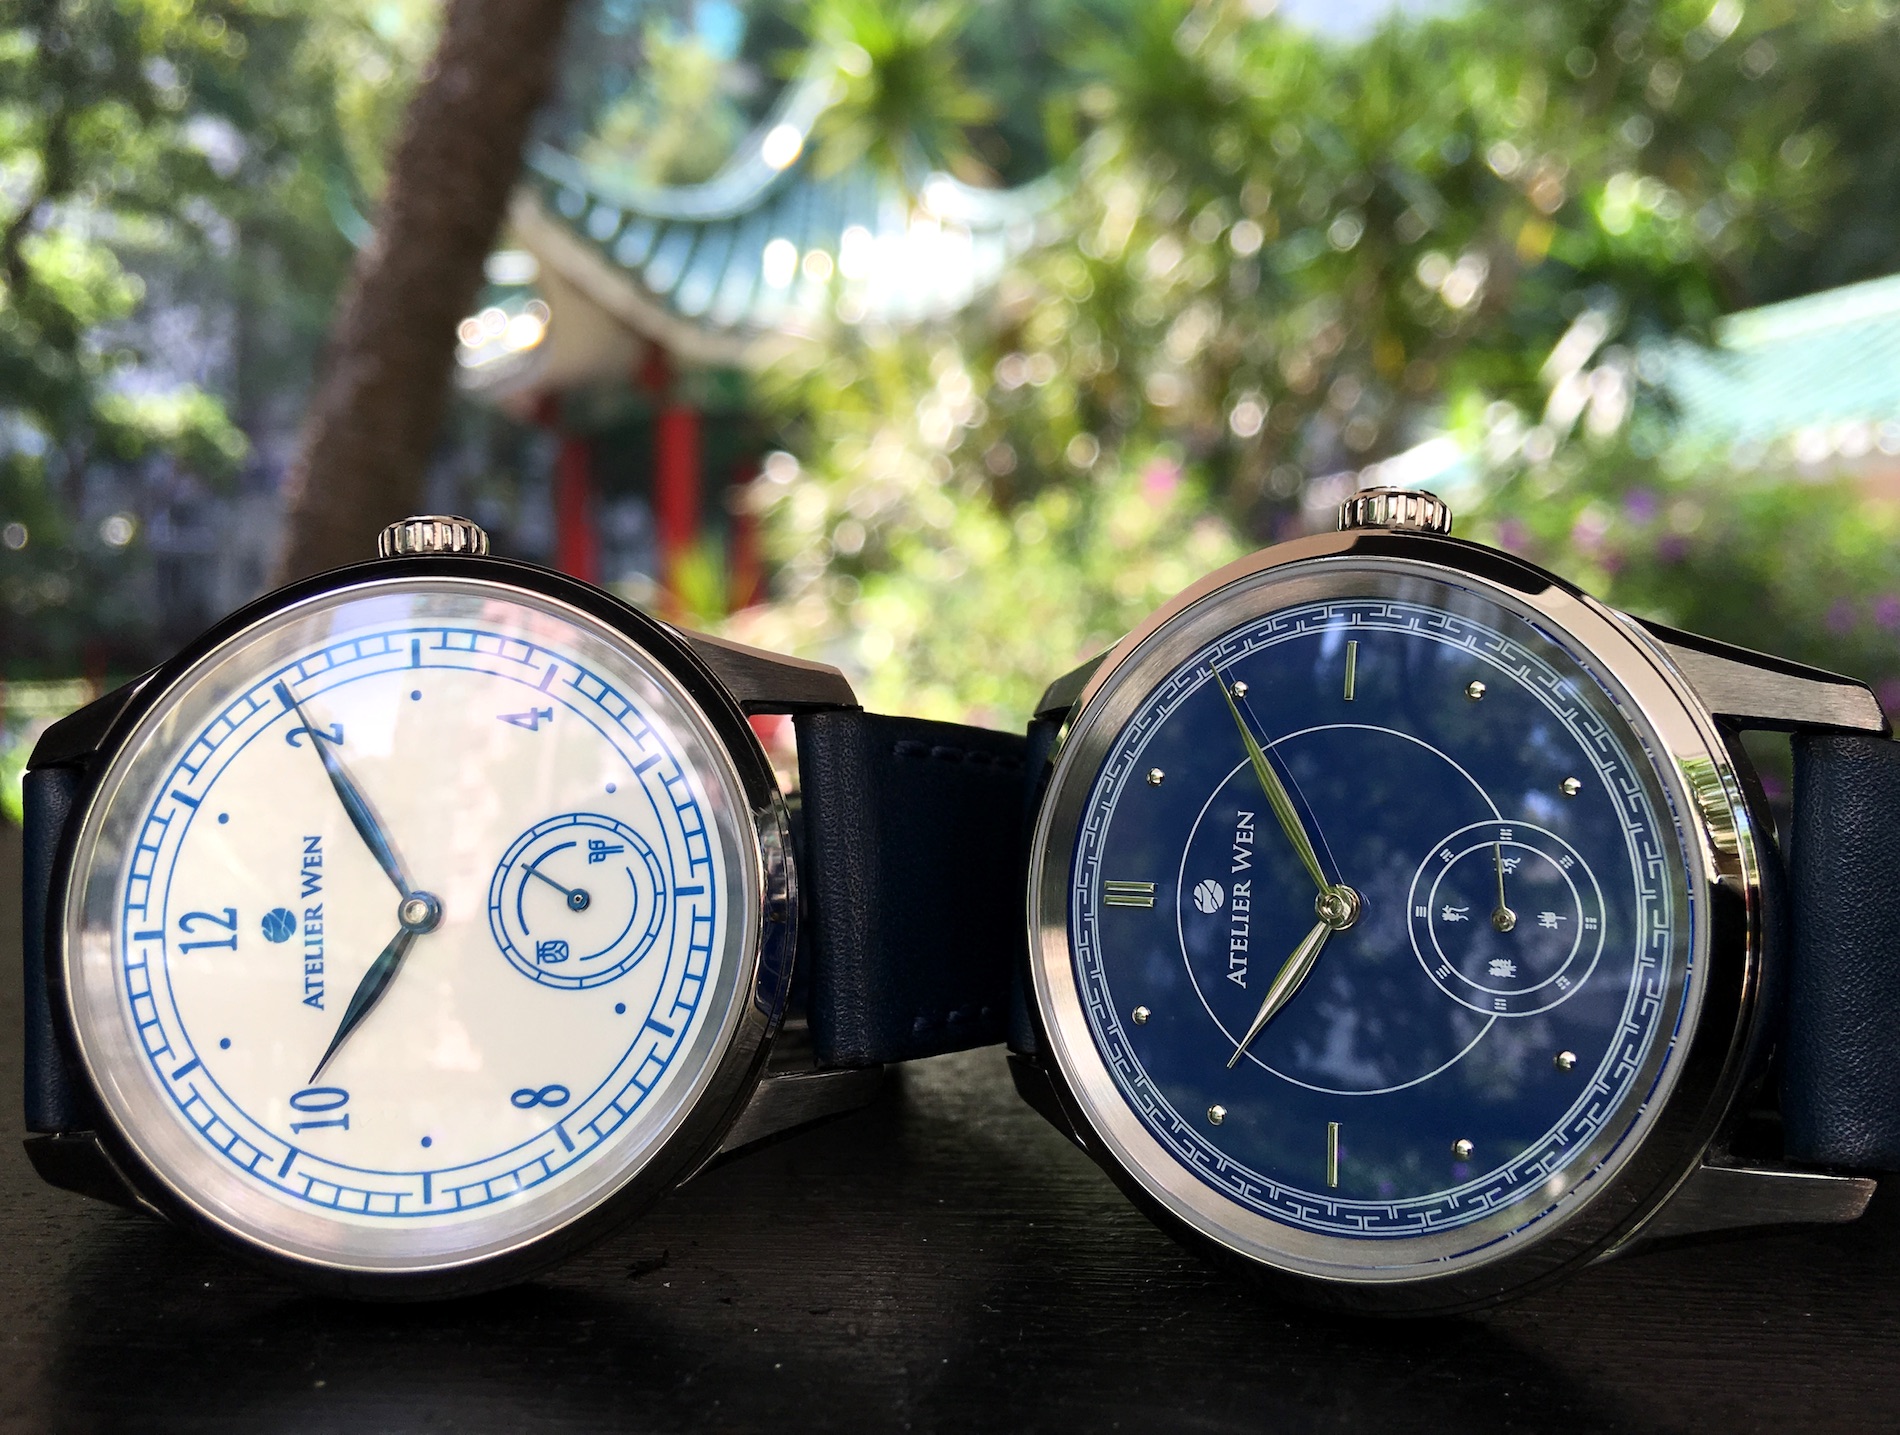 Atelier Wen Creates High Quality Watches With A Proudly Chinese Identity